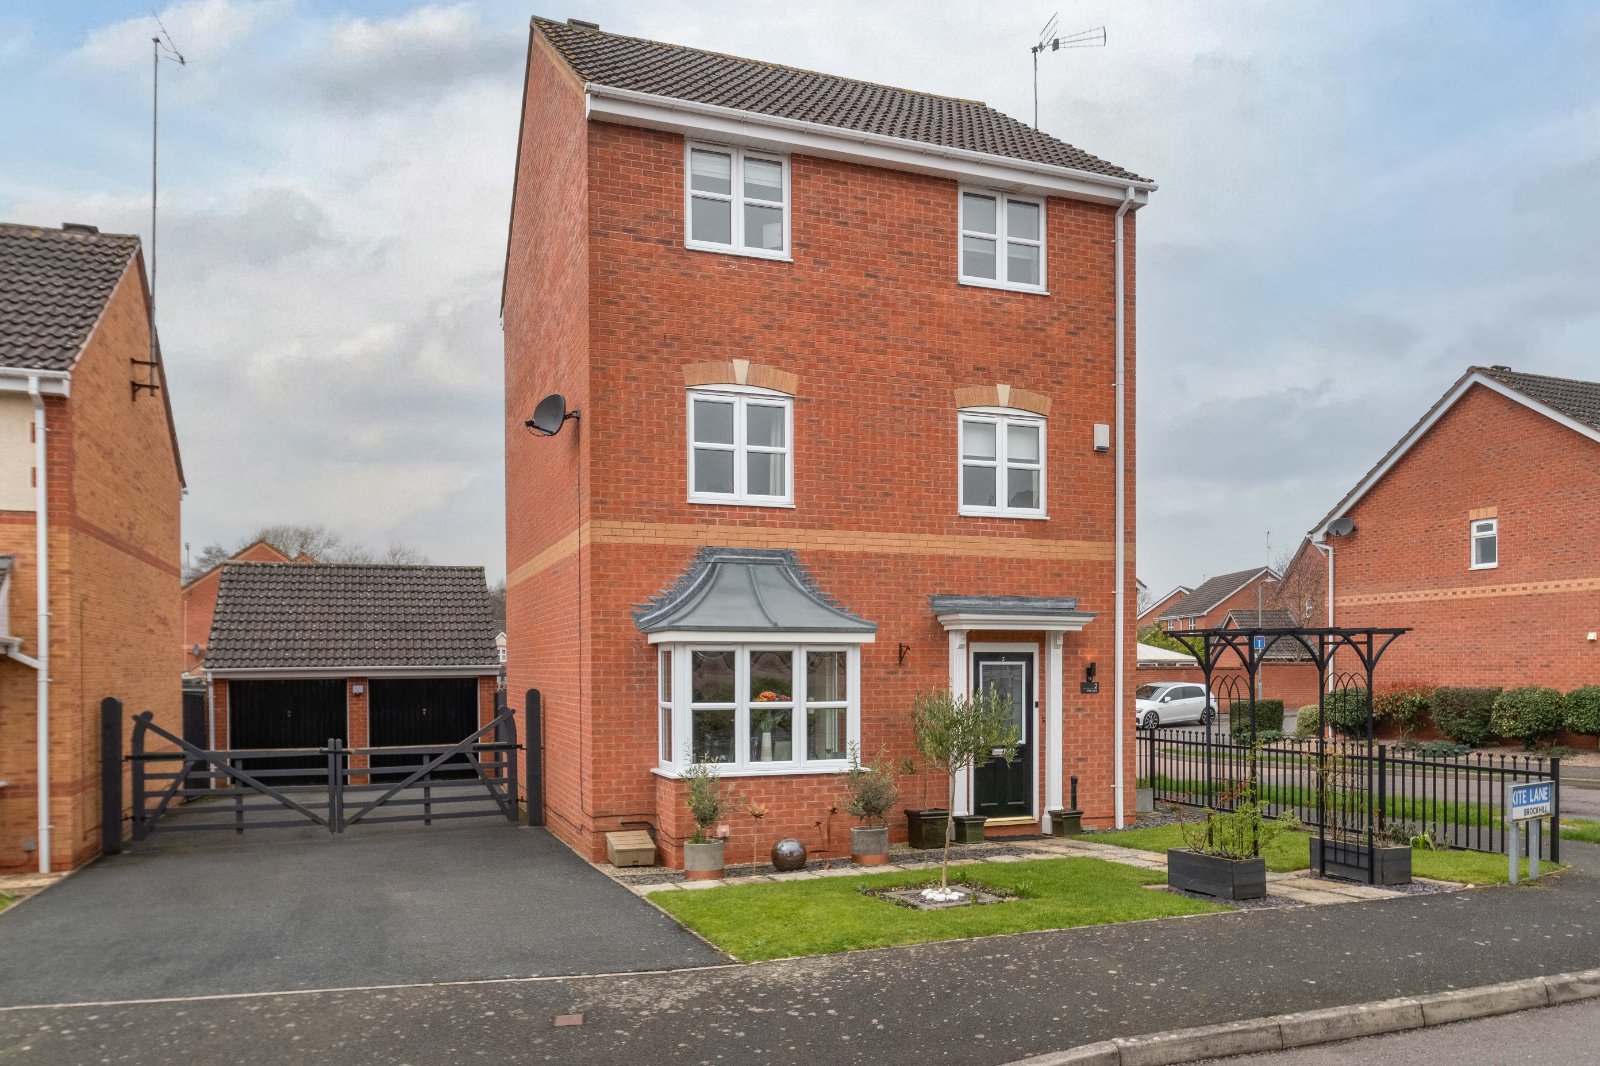 5 bed house for sale in Kite Lane, Redditch - Property Image 1